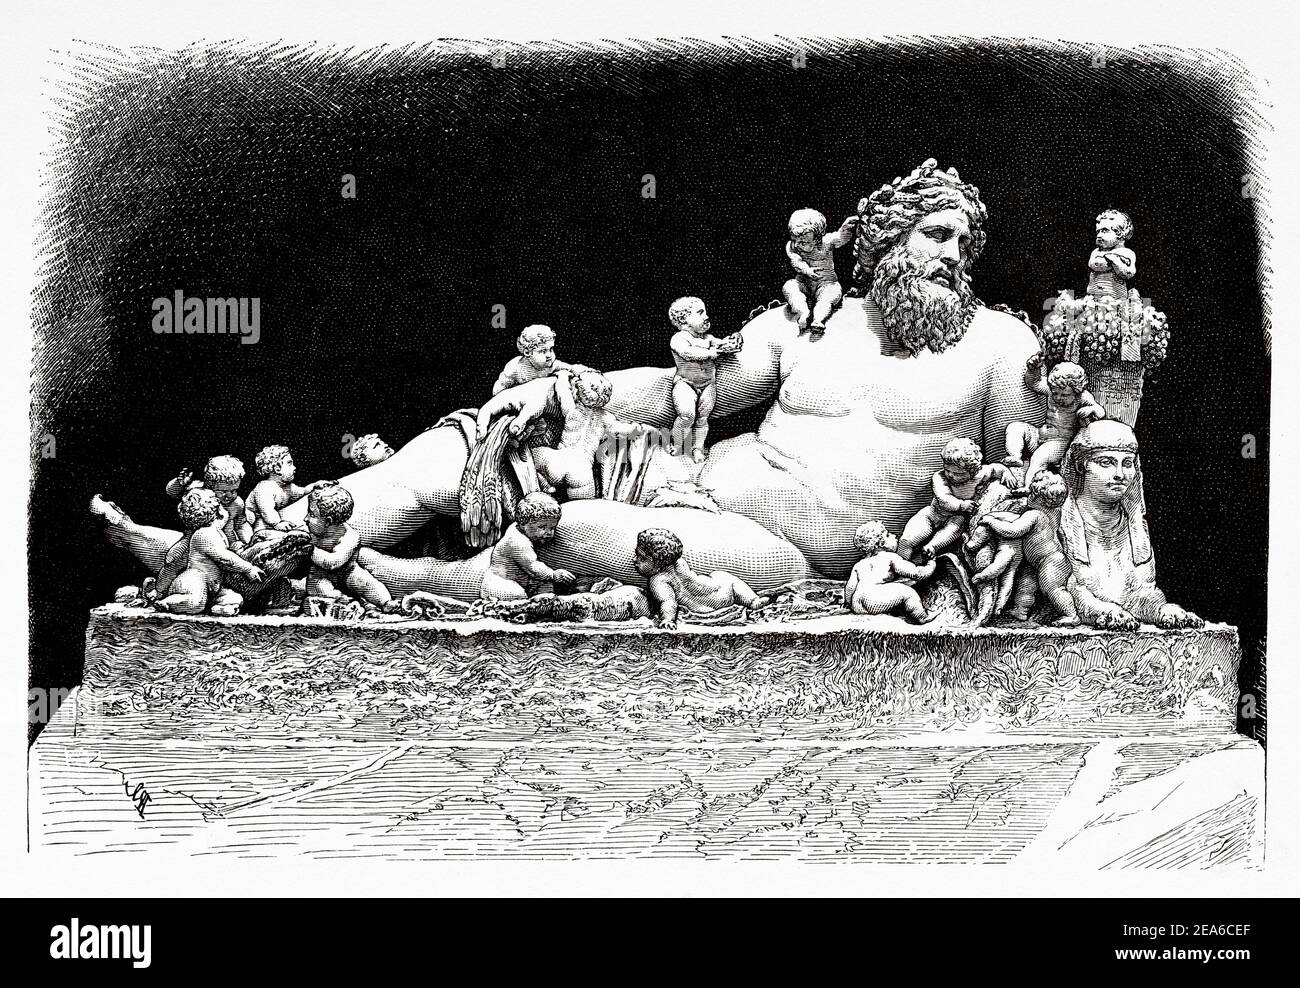 Old Father Nile. Ancient Roman sculpture. Colossus of the Nile, river god with sphinxes and crocodiles. Ancient Egypt History. Old 19th century engraved illustration from El Mundo Ilustrado 1879 Stock Photo